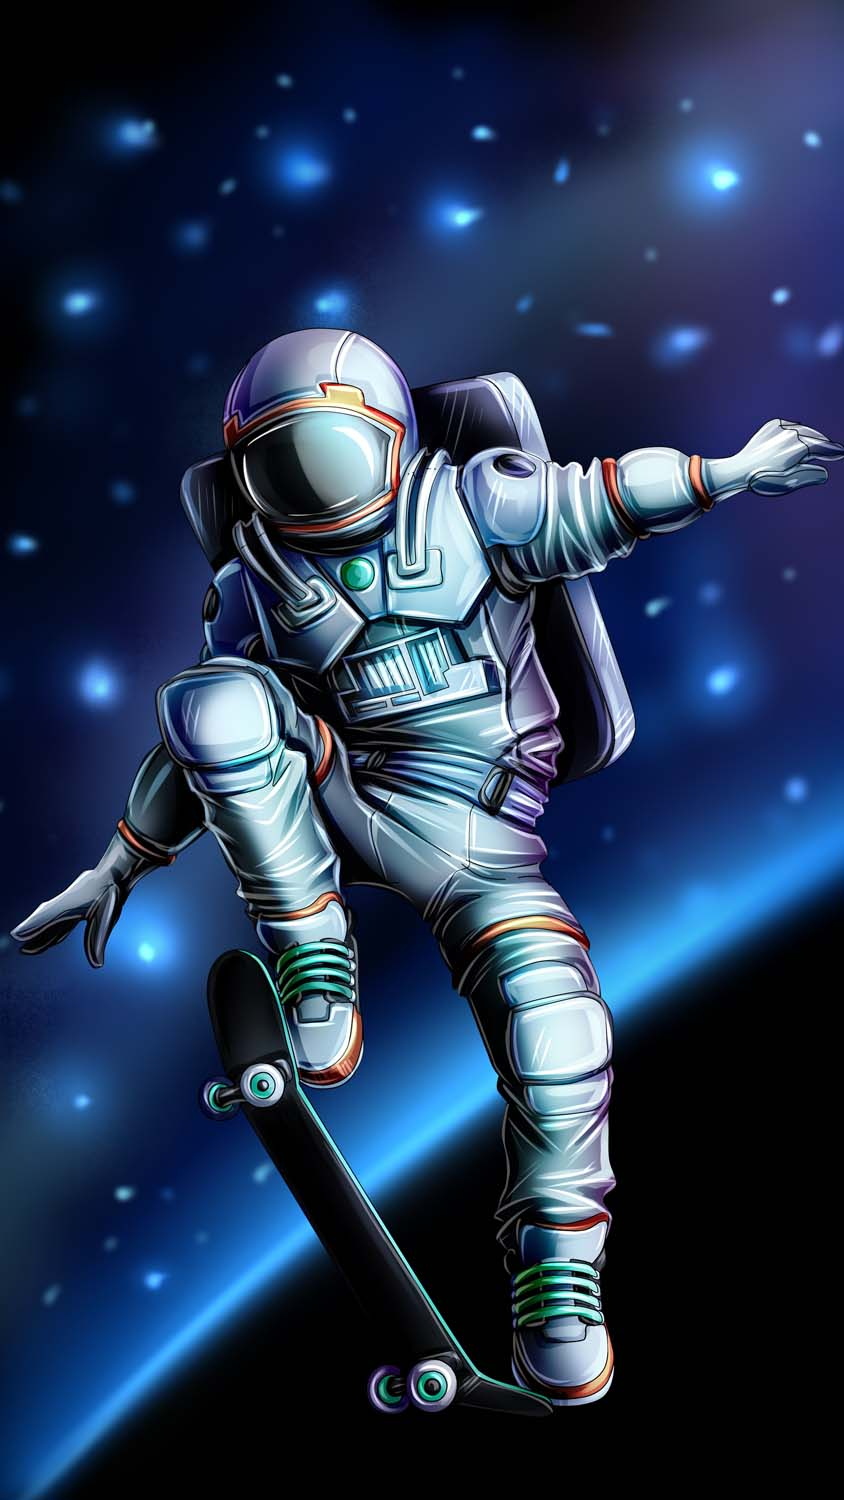 Astronaut Surfing IPhone Wallpaper HD  IPhone Wallpapers